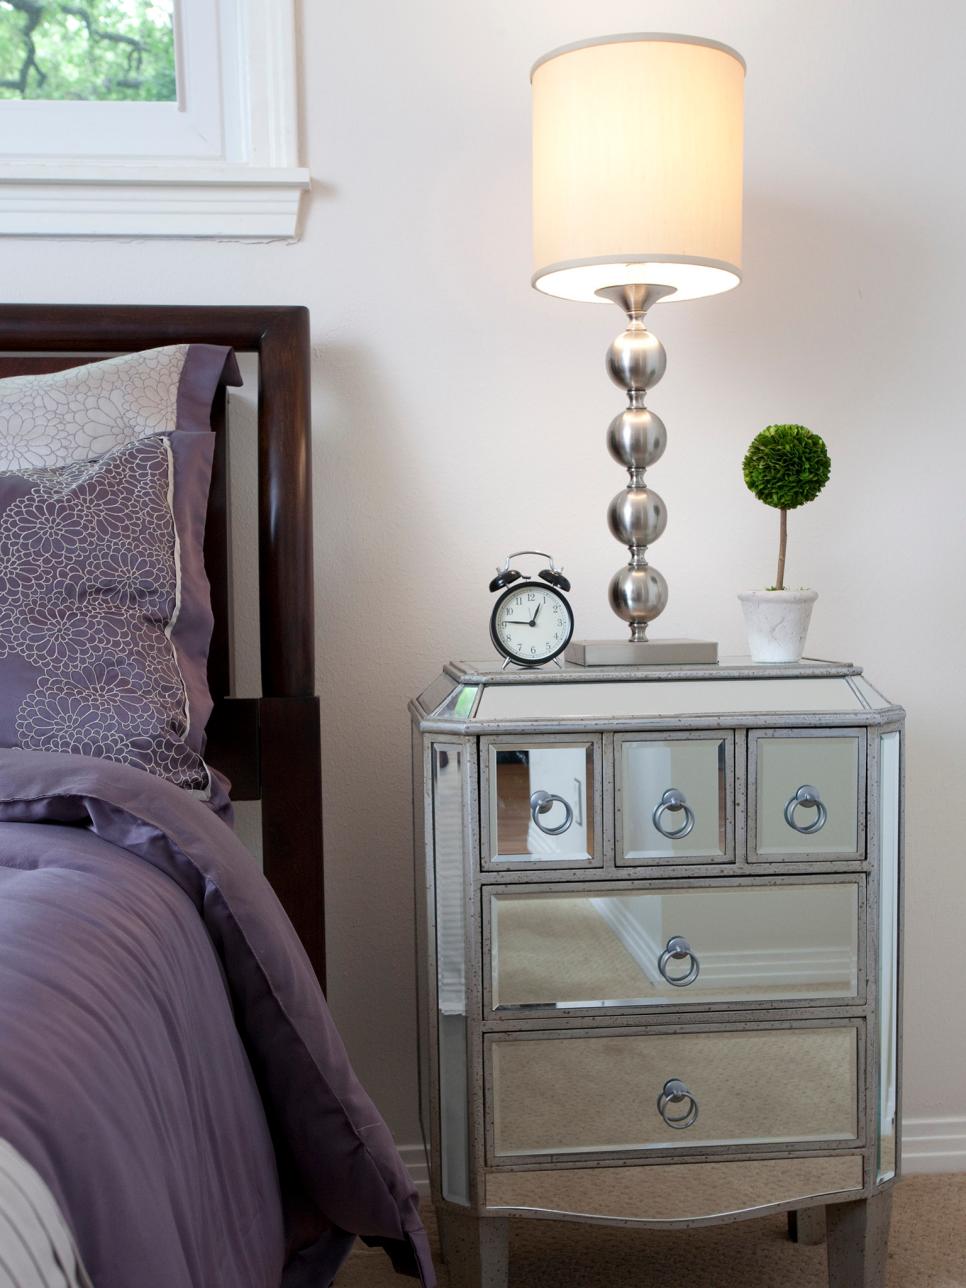 Transitional Bedroom With Mirrored Nightstand | HGTV